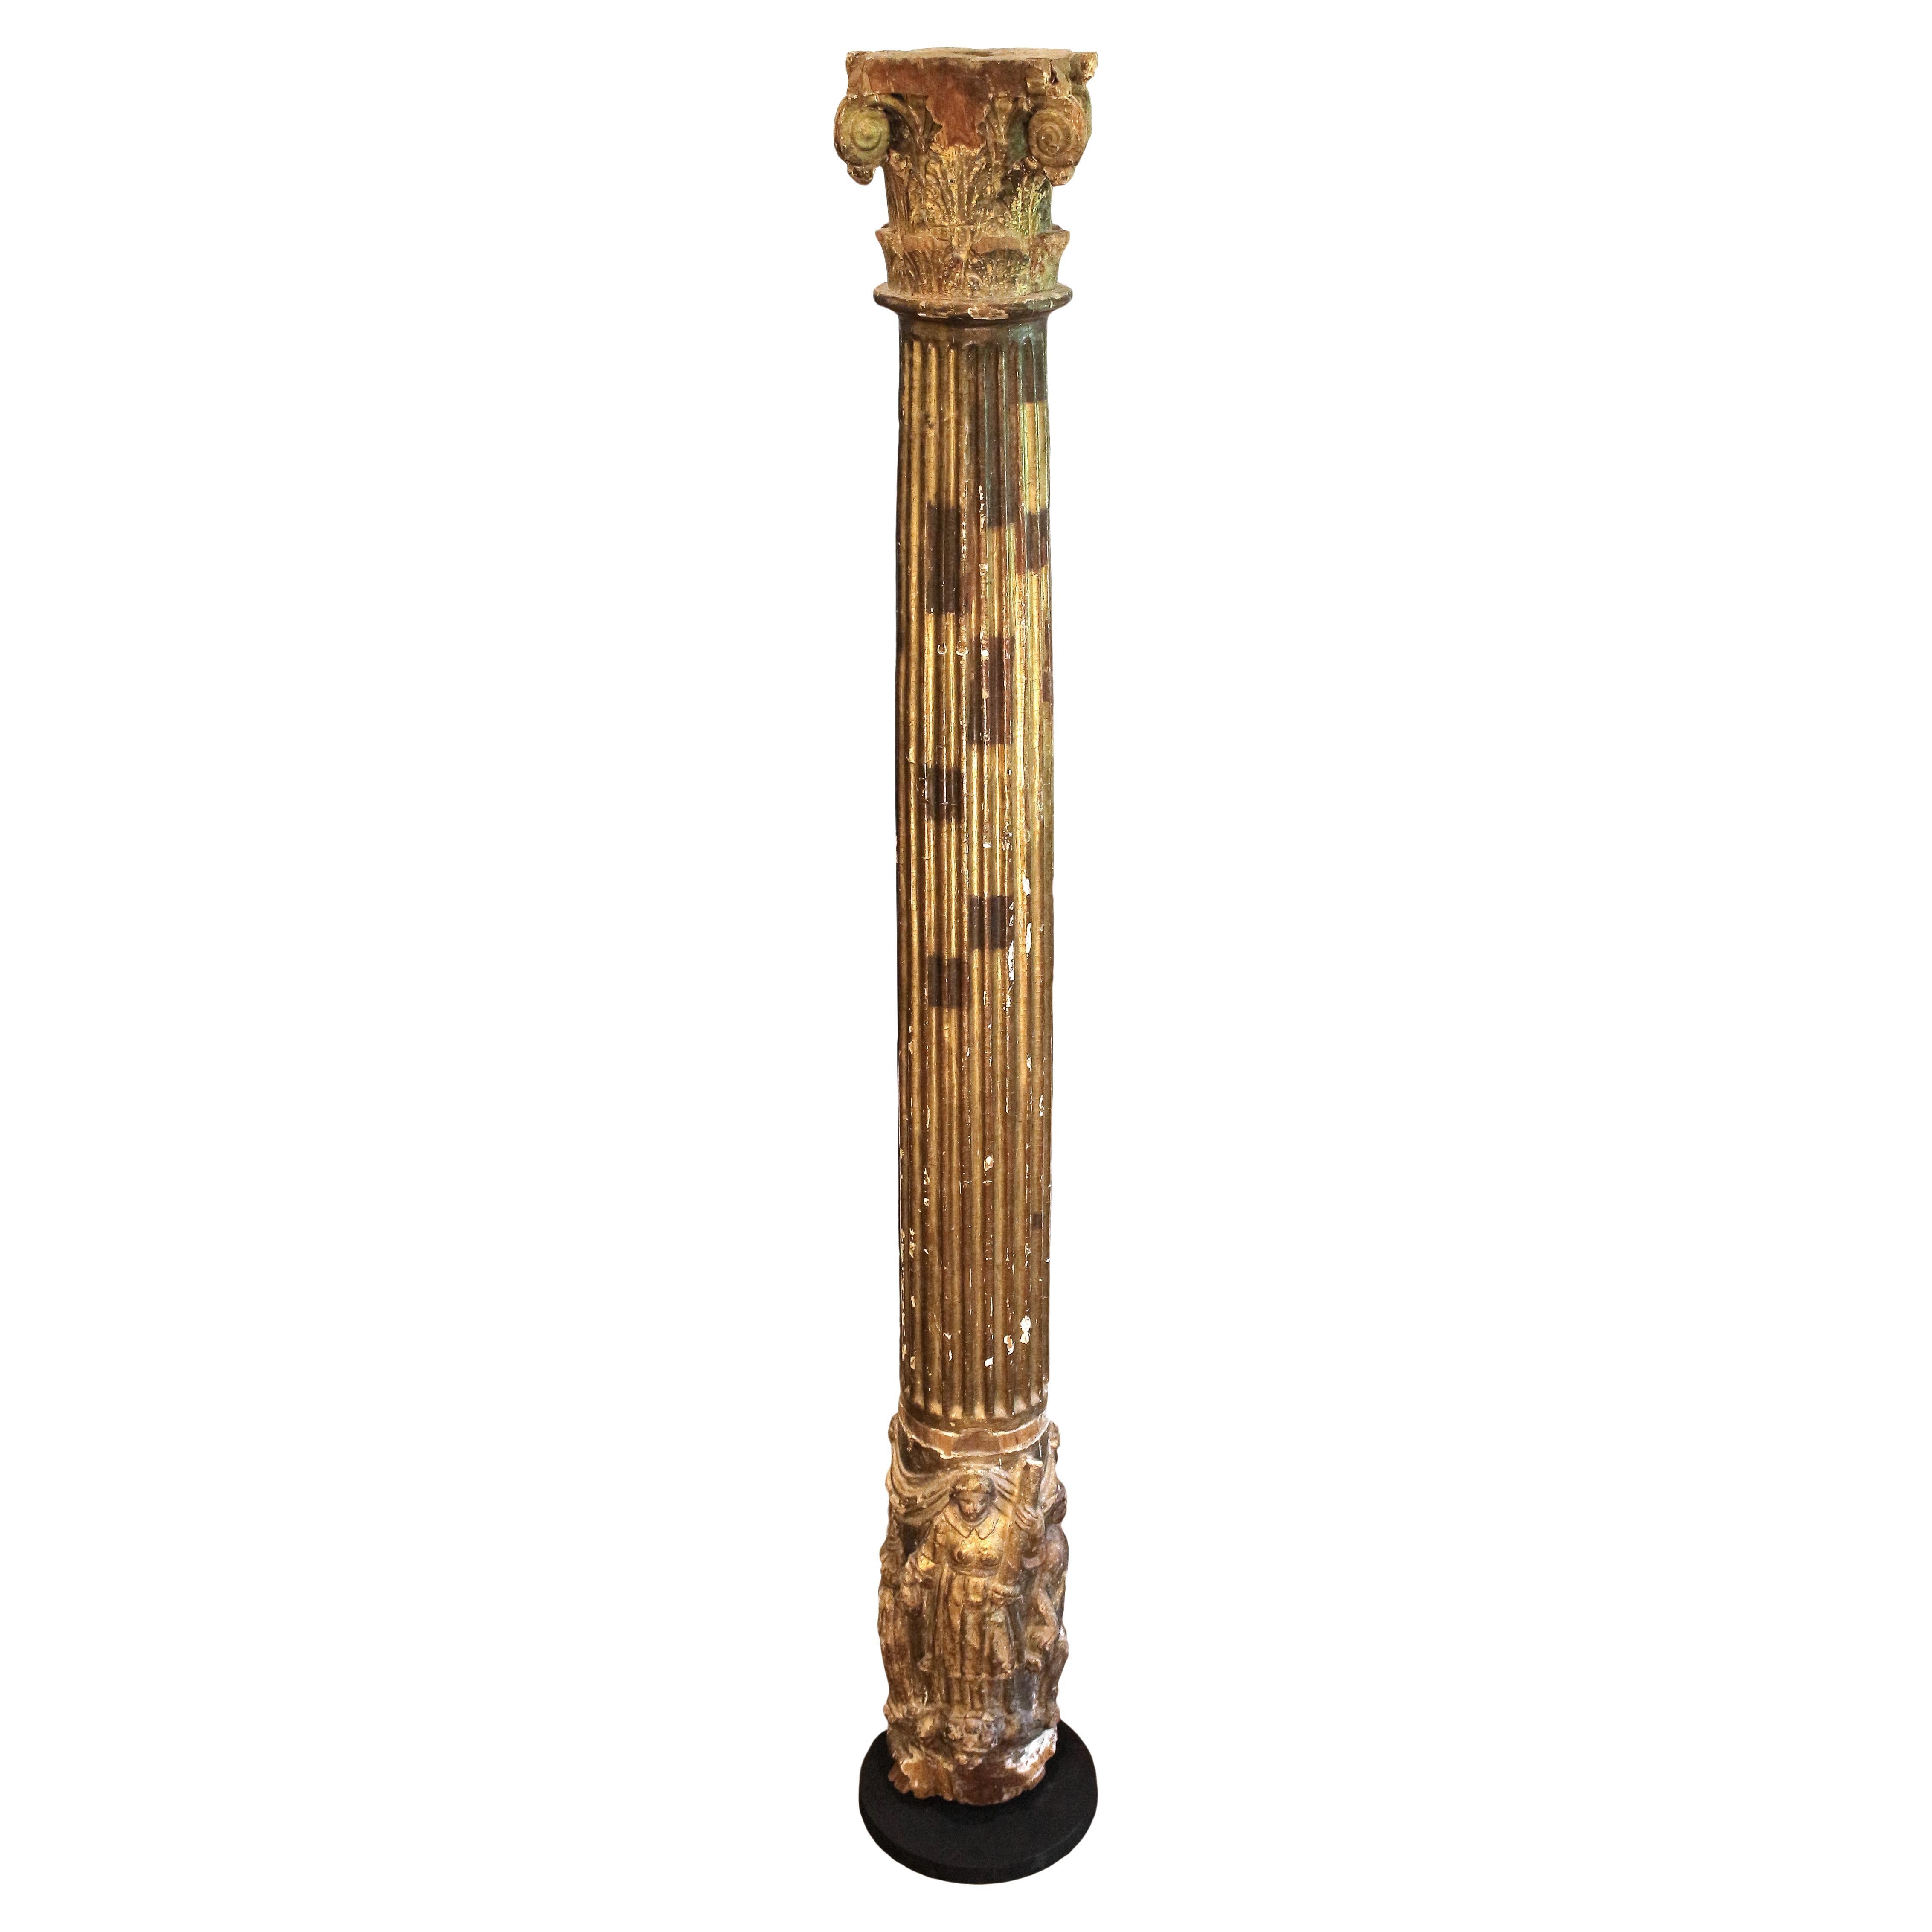 Early-Mid 18th Century Baroque Carved & Gilt Column For Sale